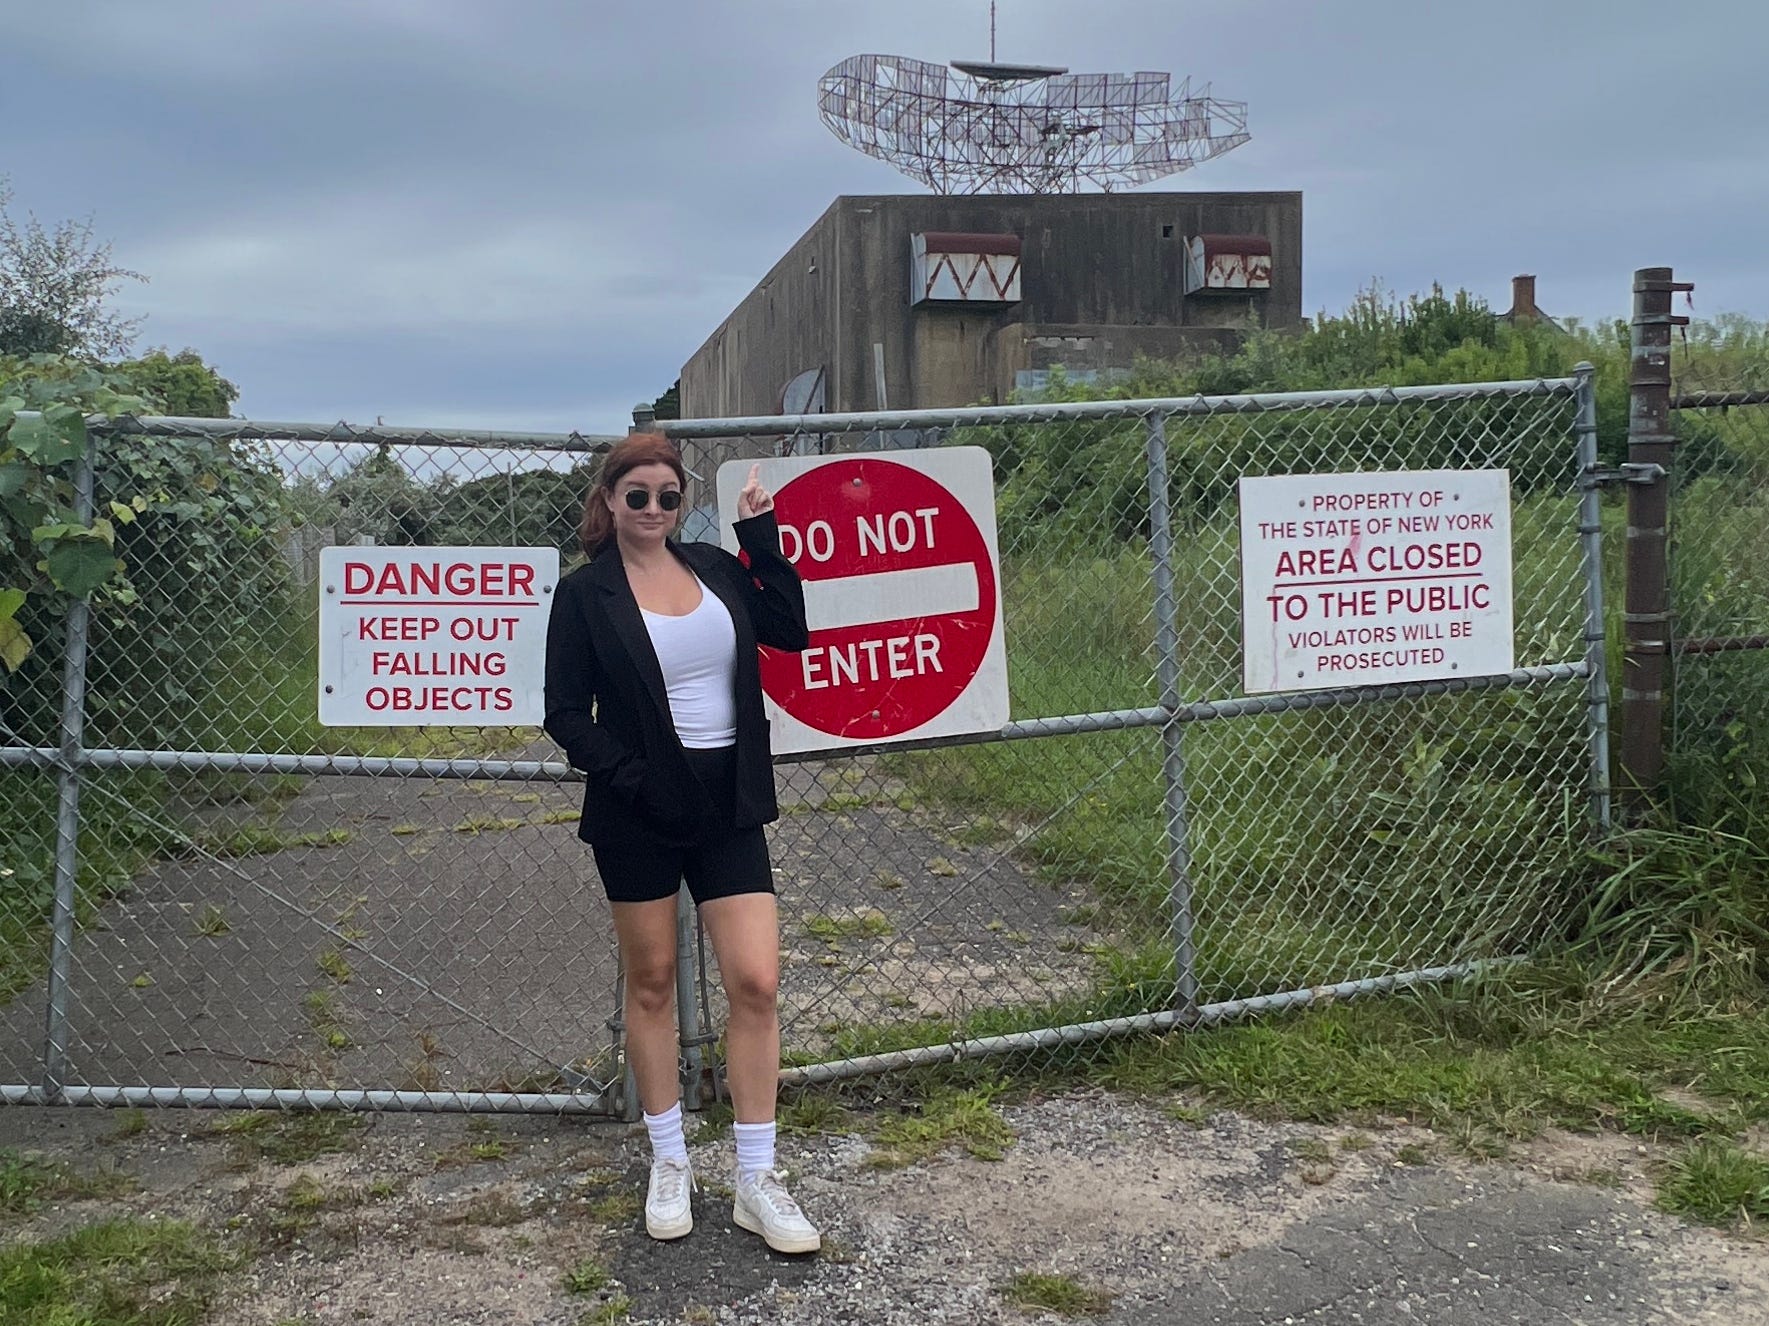 <ul class="summary-list"> <li>Camp Hero is a state park in Montauk, the easternmost tip of Long Island, New York.</li> <li>It used to be Montauk Air Force Station, which reportedly inspired Netflix's "Stranger Things."</li> <li>Last summer, I visited the state park and understood why it's the subject of conspiracy theories.</li> </ul><p>Fans of "Stranger Things" know that all the interdimensional problems that have befallen our friends in Hawkins, Indiana, are because of the secret government facility known as the Hawkins Lab.</p><p>But did you know that Netflix's "Stranger Things" was originally called "Montauk," named after the real-life New York town that's at the center of multiple <a href="https://www.businessinsider.com/popular-conspiracy-theories-united-states-2019-5">conspiracy theories</a>?</p><p>Since its debut in 2016, "Stranger Things" has become a phenomenon, spawning millions of dollars in merch, tie-in novels and comics, <a href="https://www.businessinsider.com/stranger-things-play-cast-release-date-plot-spinoff-list">a stage adaptation</a>, mobile games, a tabletop game, and more. It's one of Netflix's biggest franchises.</p><p>Camp Hero, formerly known as the Montauk Air Force Station, has been plagued with conspiracy theories since the book "The Montauk Project: Experiments in Time," written by Preston Nichols, was published in 1992. Its unsubstantiated claims included that researchers at the base had repressed the memories of employees who'd been subjected to experiments throughout the '70s and '80s.</p><p>Today, it's possible to visit Camp Hero, which opened to the public as a state park in 2002. As someone who has been to Montauk dozens of times but never to Camp Hero — and as someone going through "Stranger Things" withdrawal as we await a release date for season five — I jumped at the chance to check out the base, which is now abandoned.</p><p>I came away from my visit last summer understanding where the Duffer brothers, who created "Stranger Things," got their inspiration. Camp Hero would certainly be on my list of the creepiest places I've visited.</p><p>Look inside the park, from its beautiful ocean views to the mysterious 90-foot radar tower that still stands now.</p><div class="read-original">Read the original article on <a href="https://www.businessinsider.com/camp-hero-montauk-air-force-base-inspired-stranger-things-photos-2023-8">Business Insider</a></div>